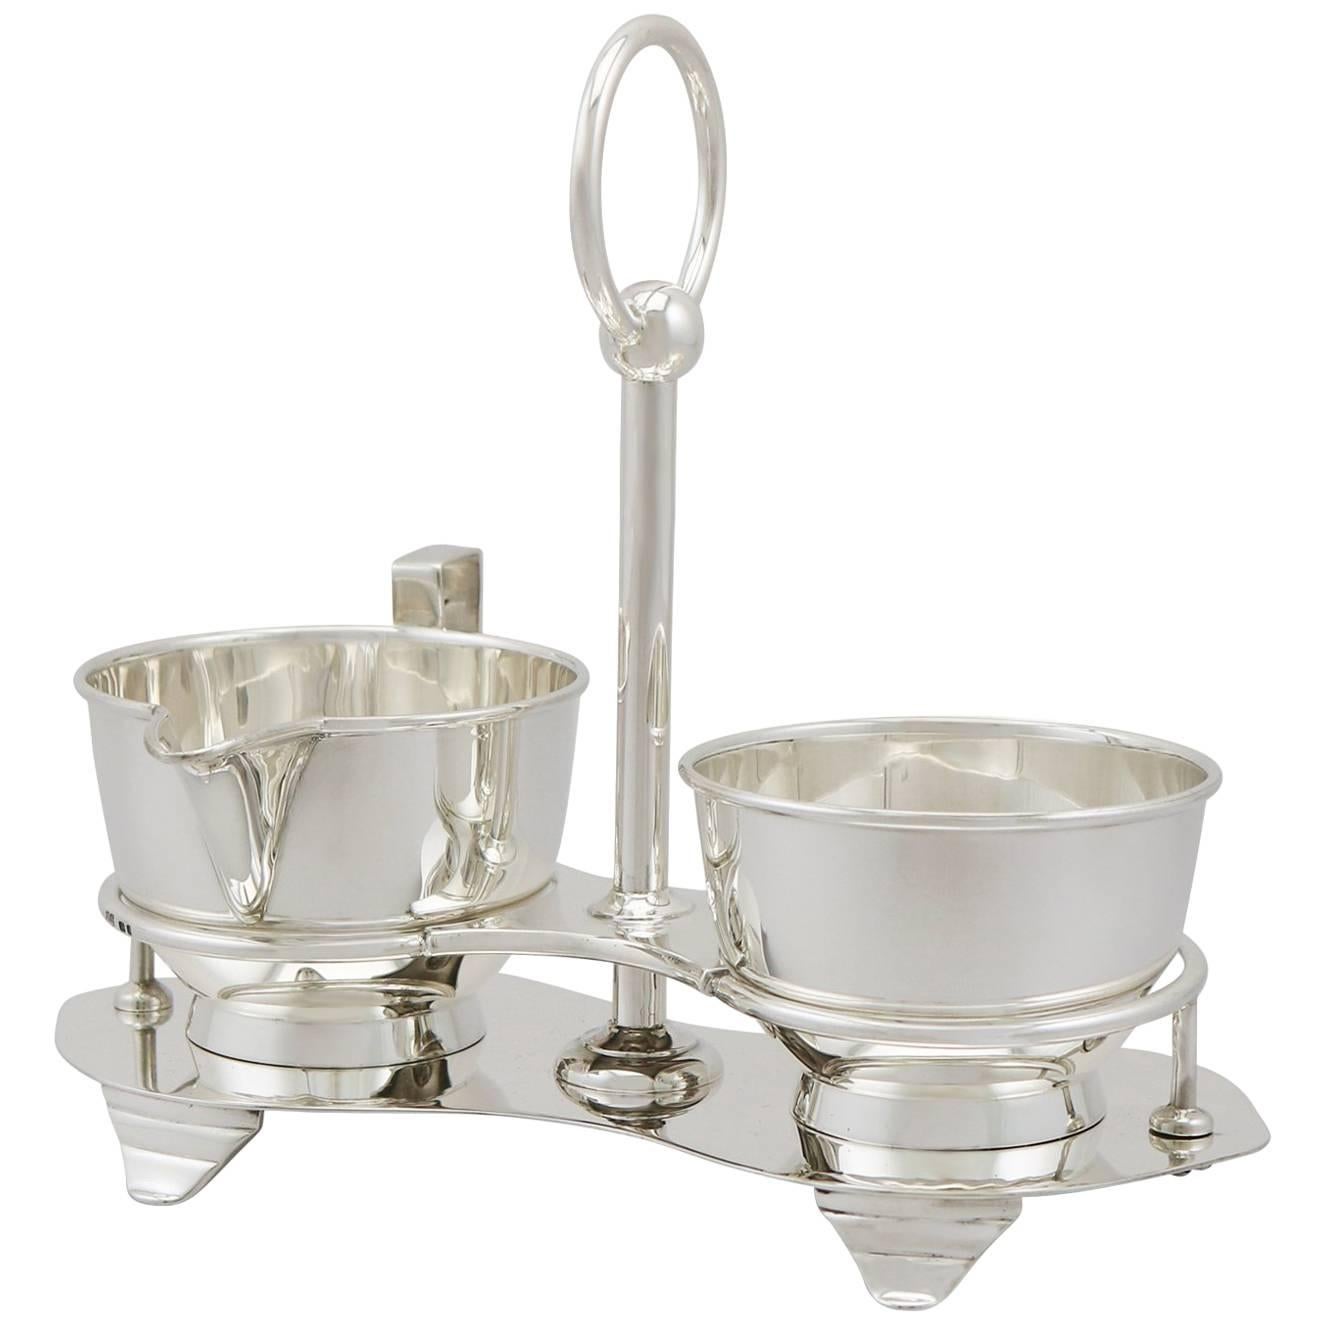 1936 Antique Sterling Silver Cream and Sugar Set